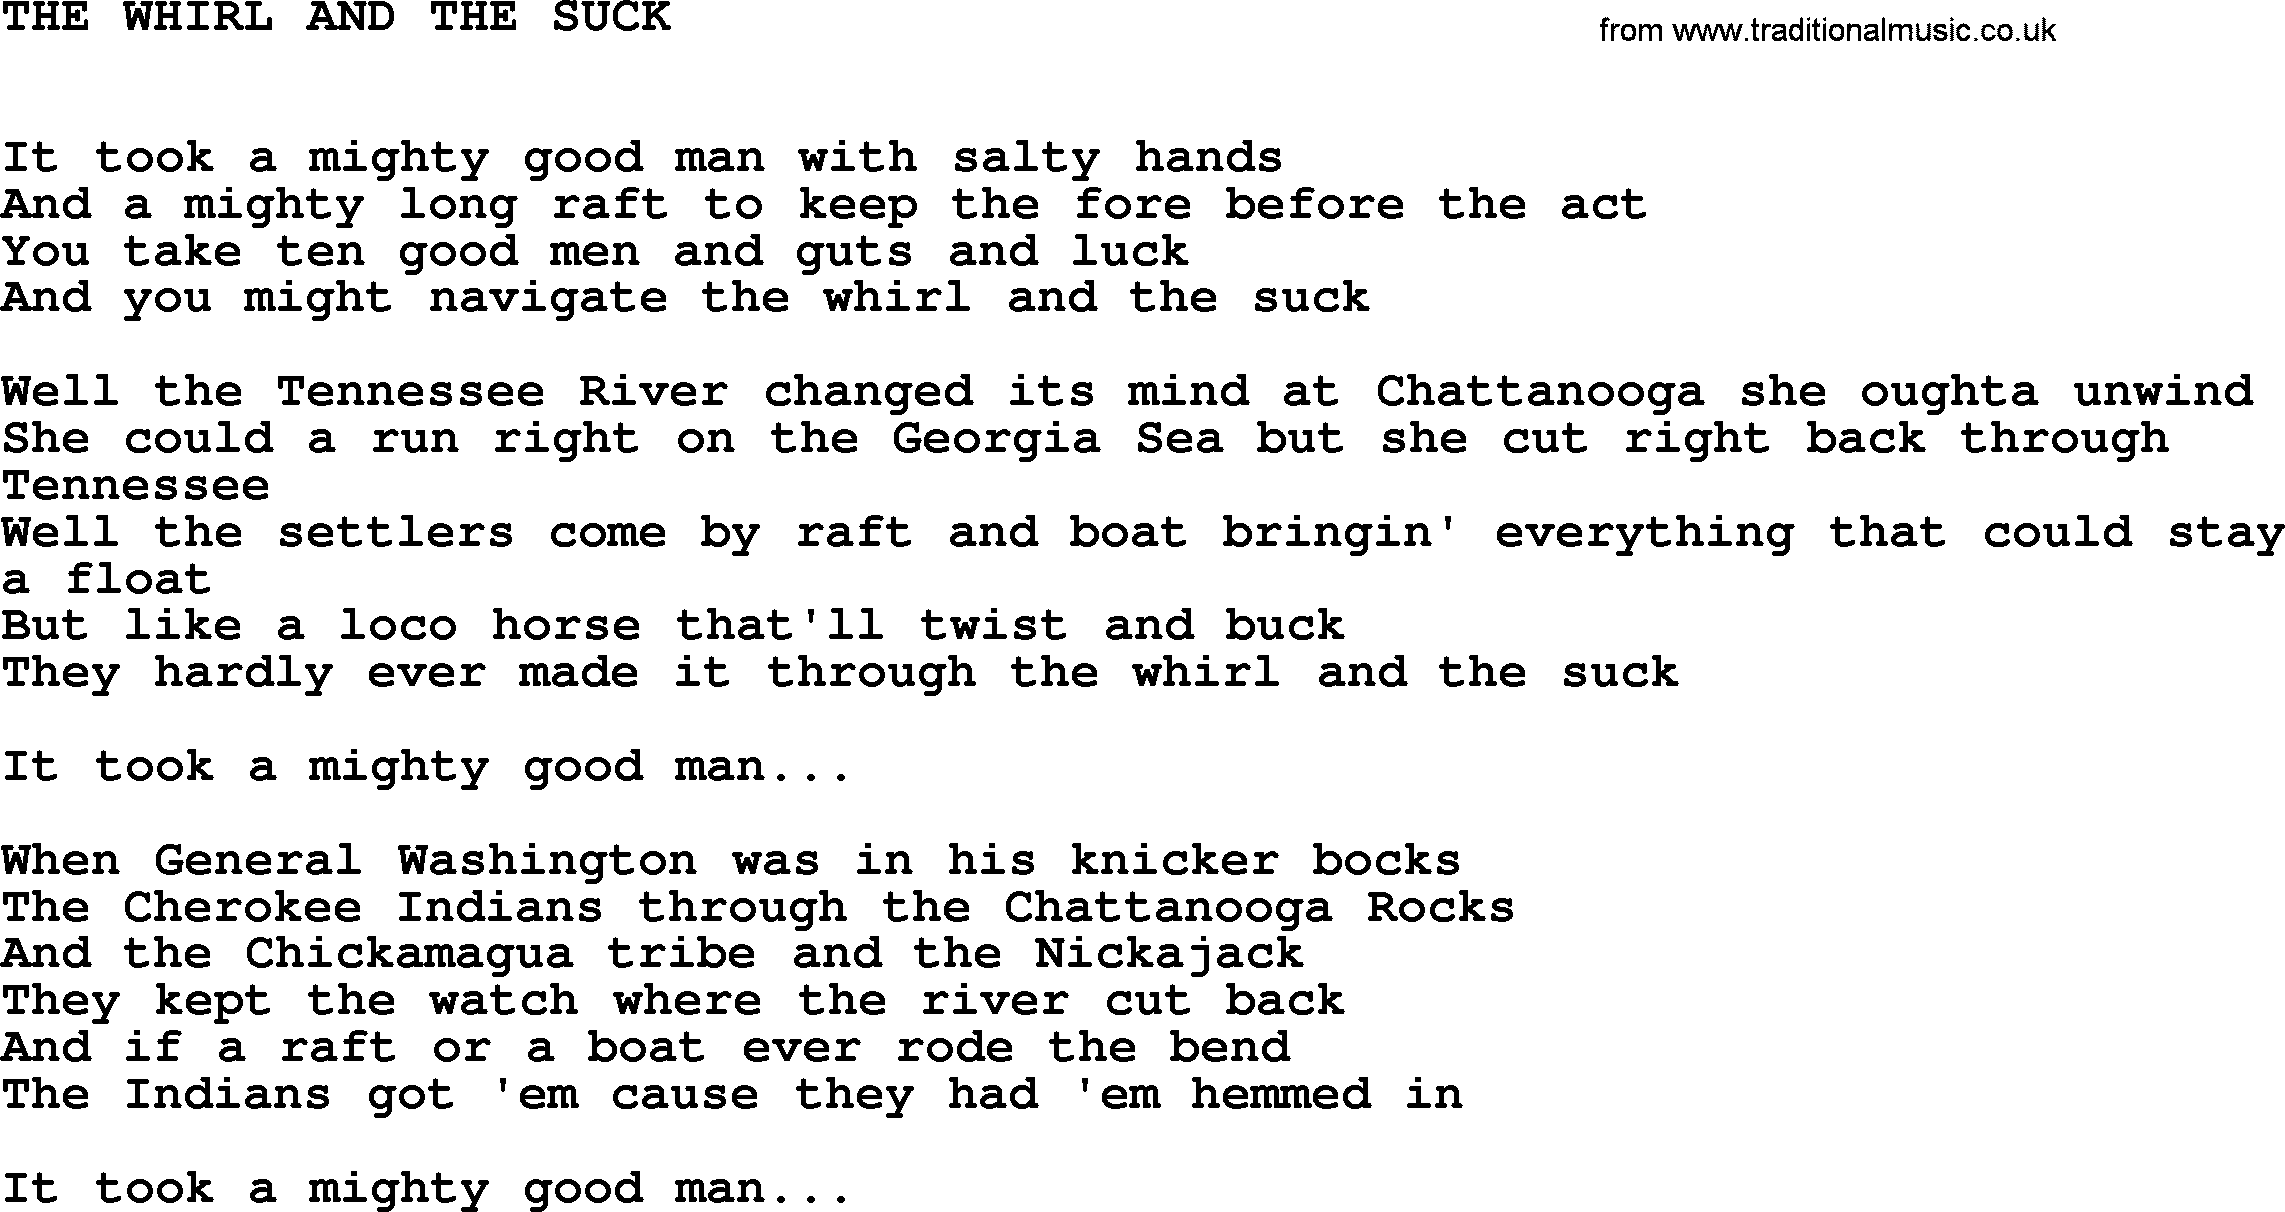 Johnny Cash song The Whirl And The Suck.txt lyrics